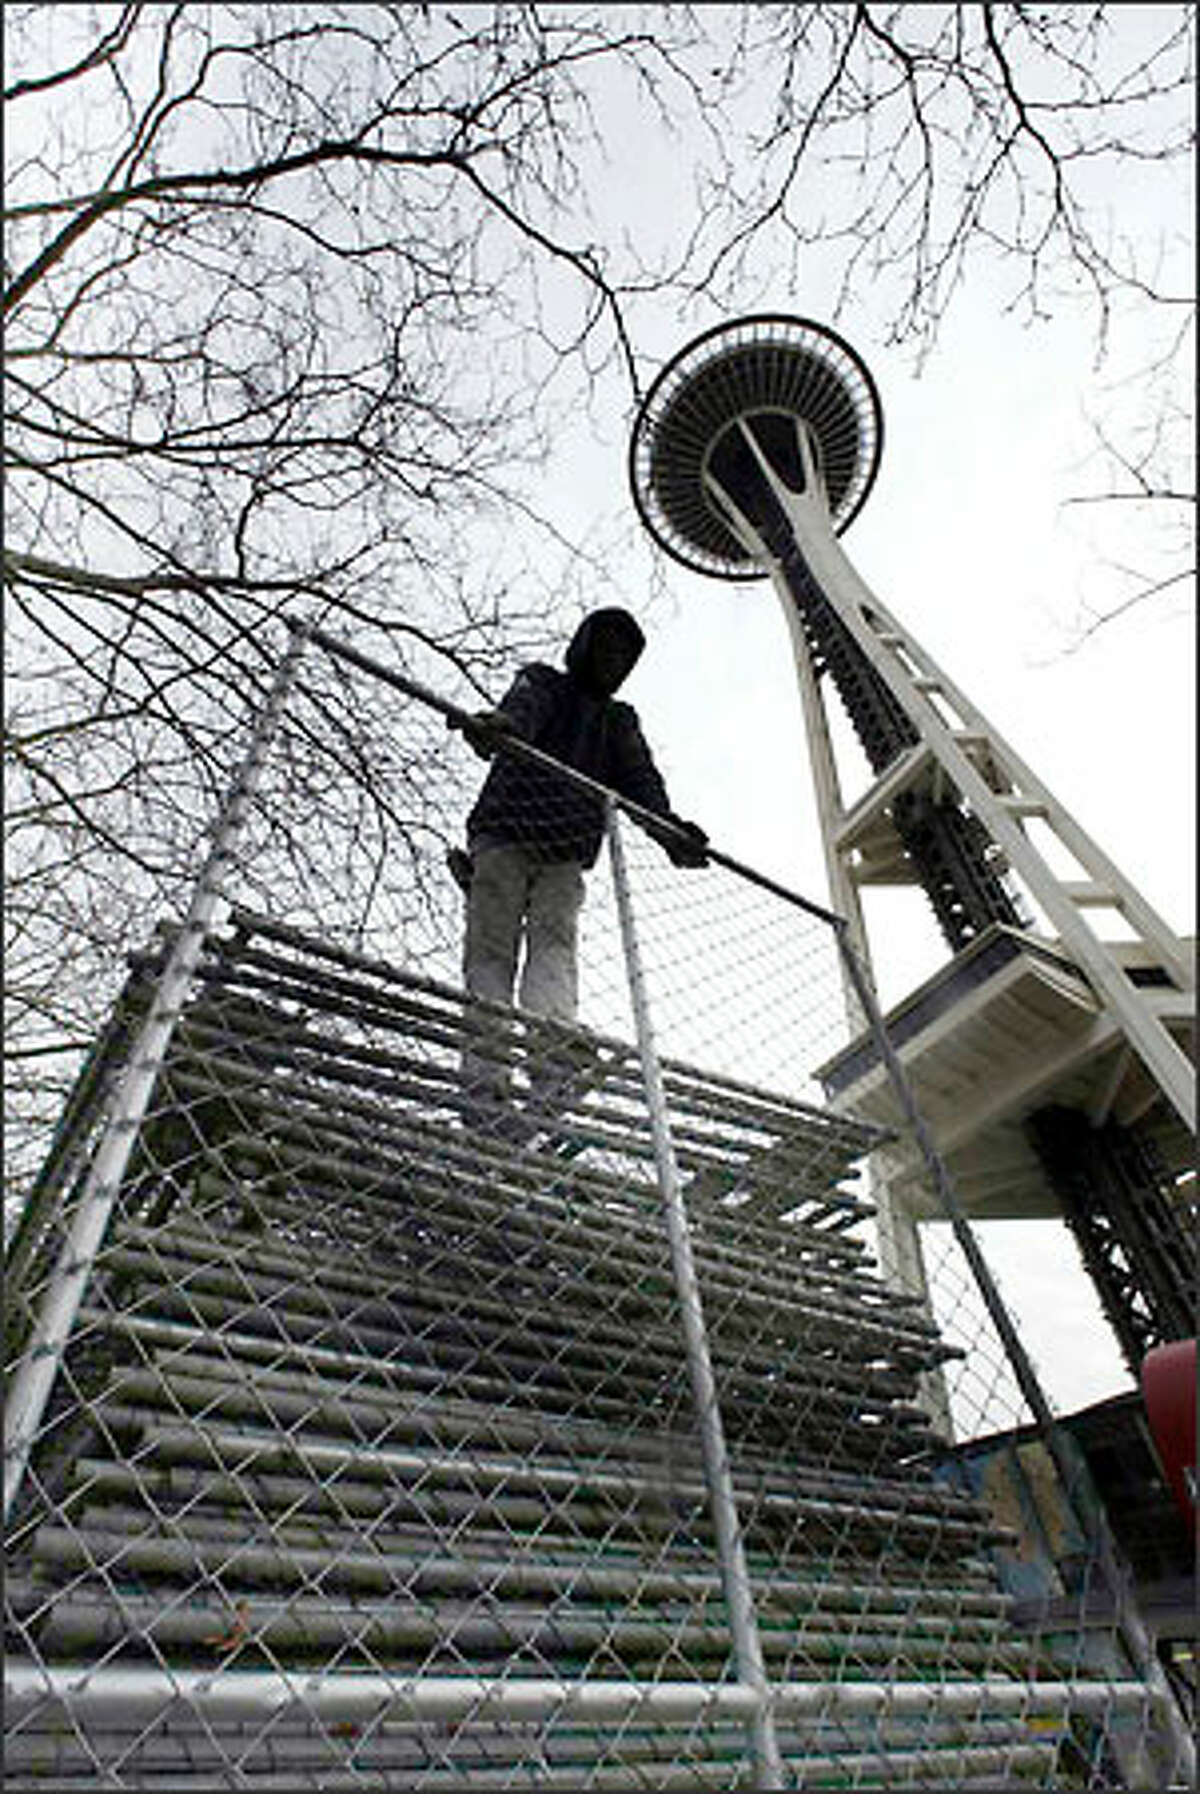 Victaly Soloneko from National Rent-a-Fence unloads sections of chain link that will form a security fence line around the Space Needle for New Year's Eve.